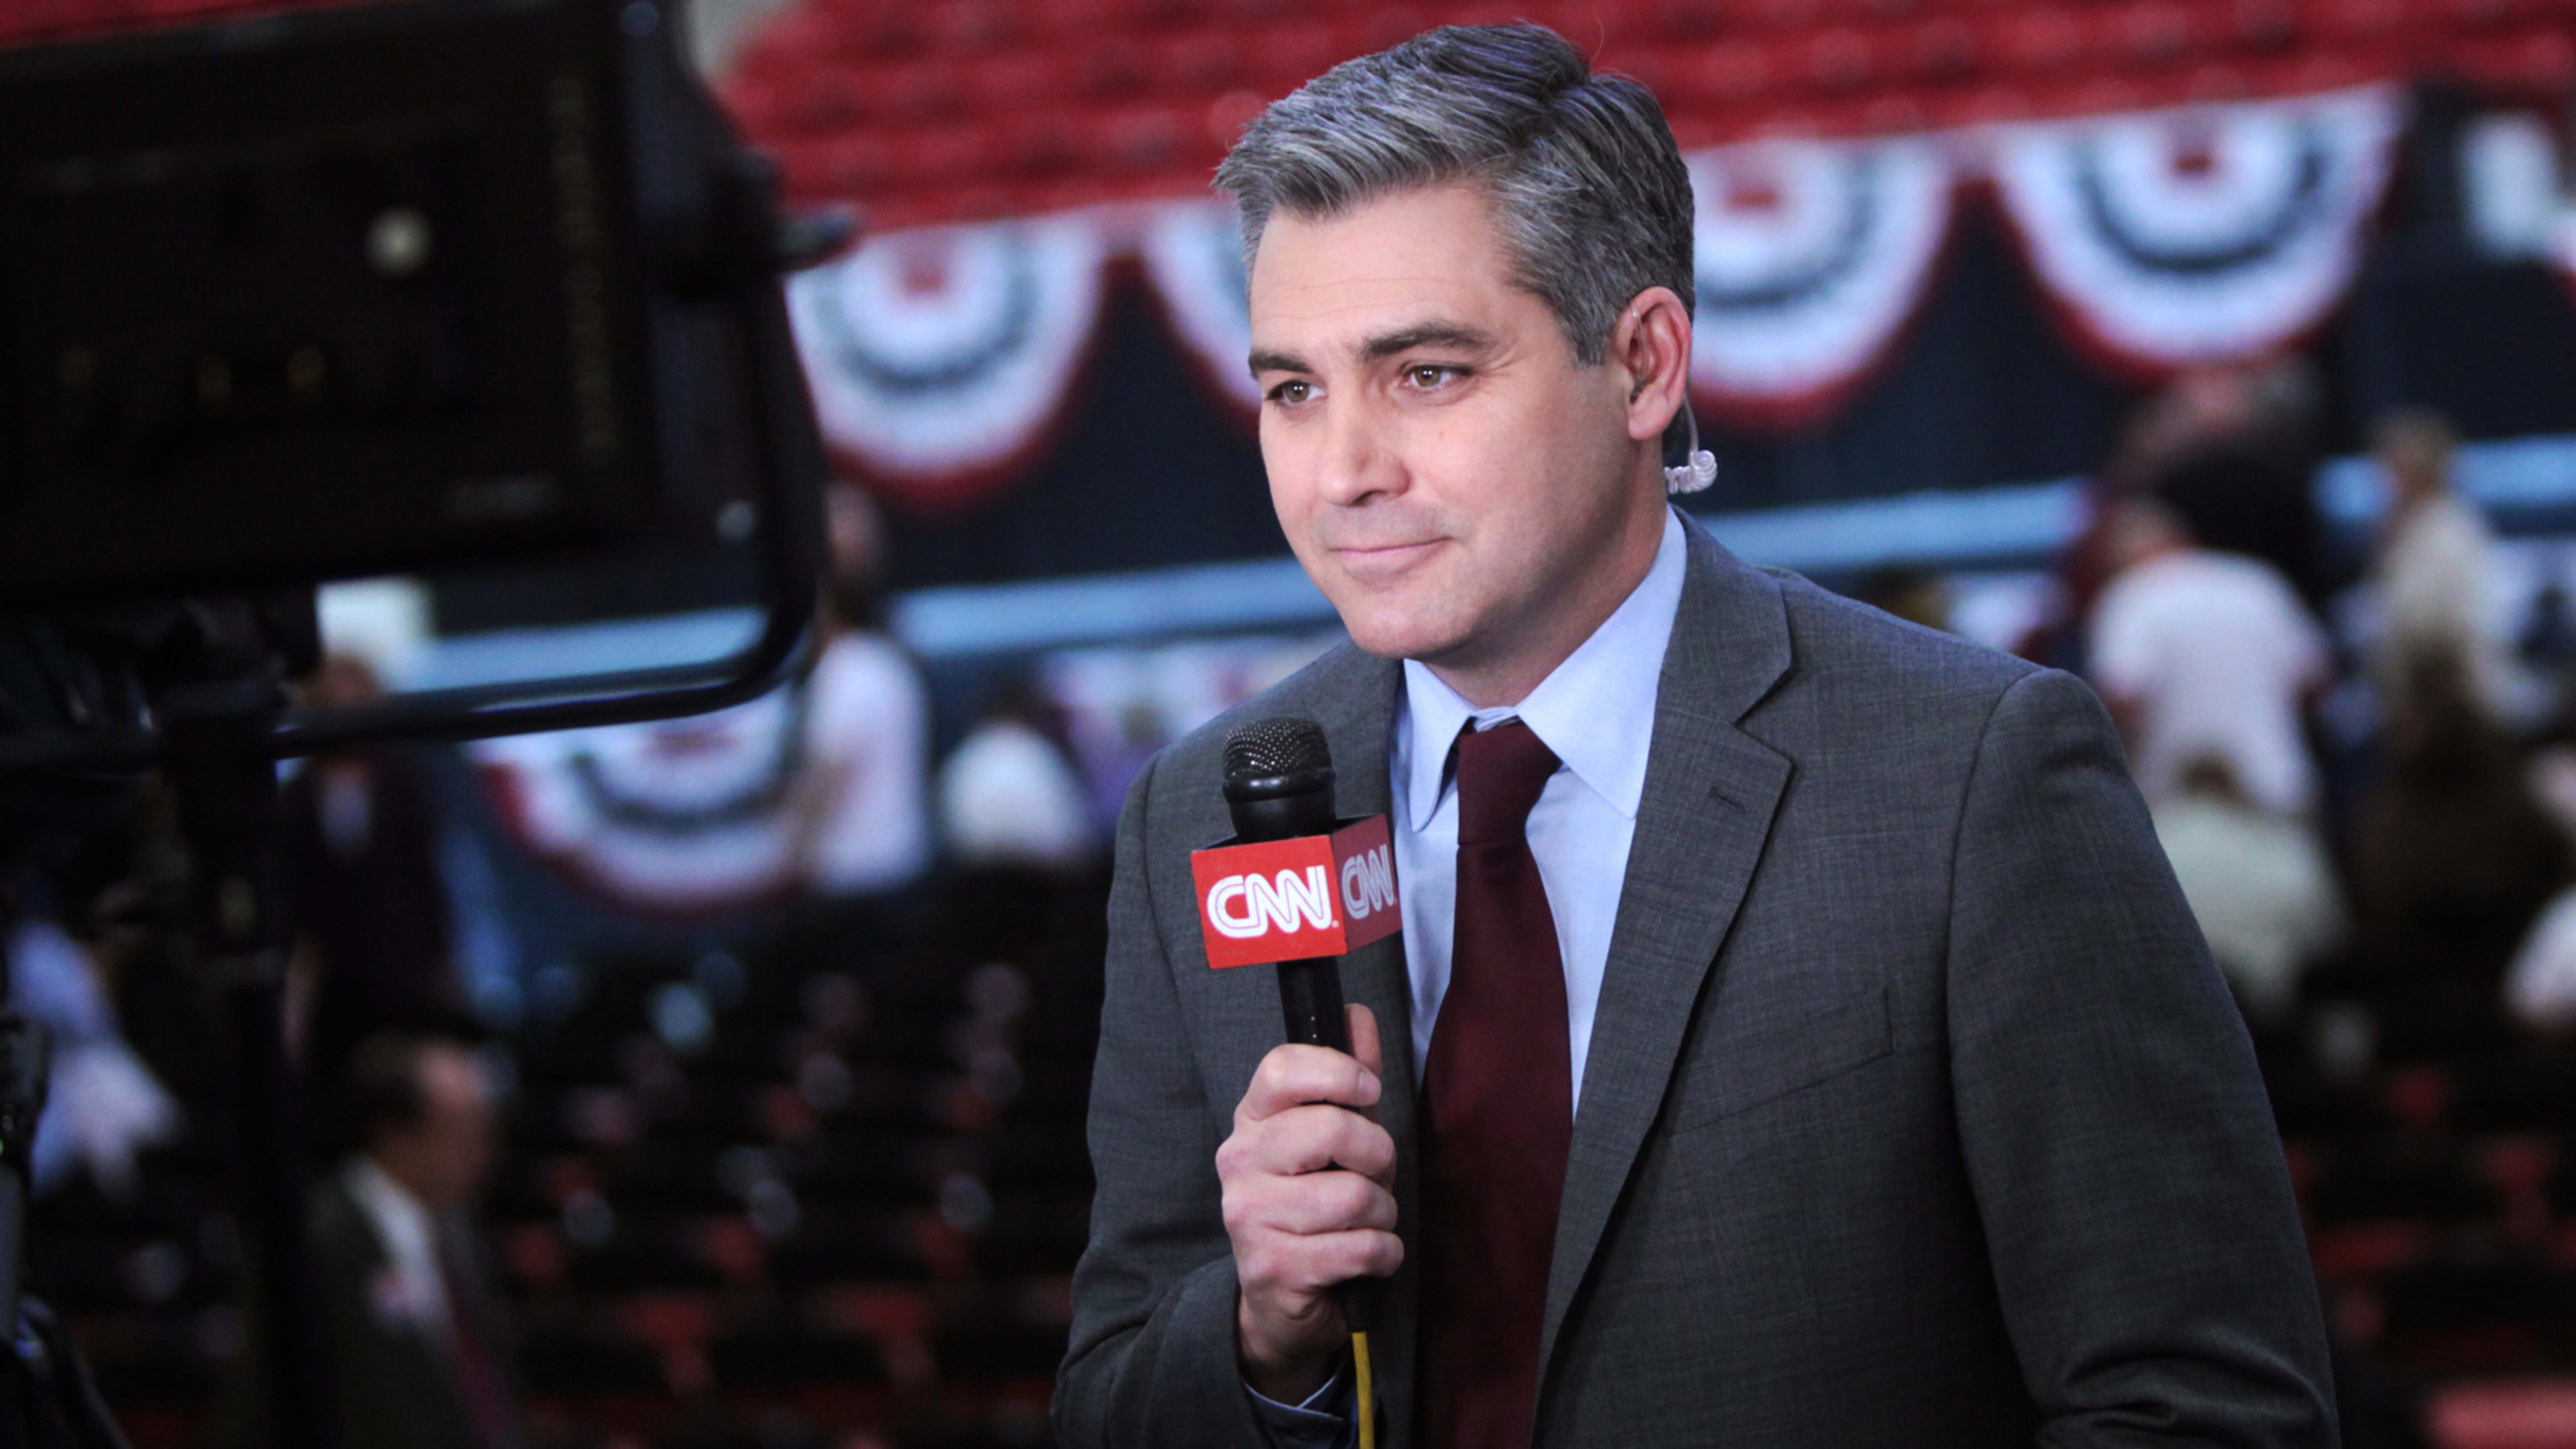 A Trump-appointed judge just ruled in favor of CNN and Jim Acosta